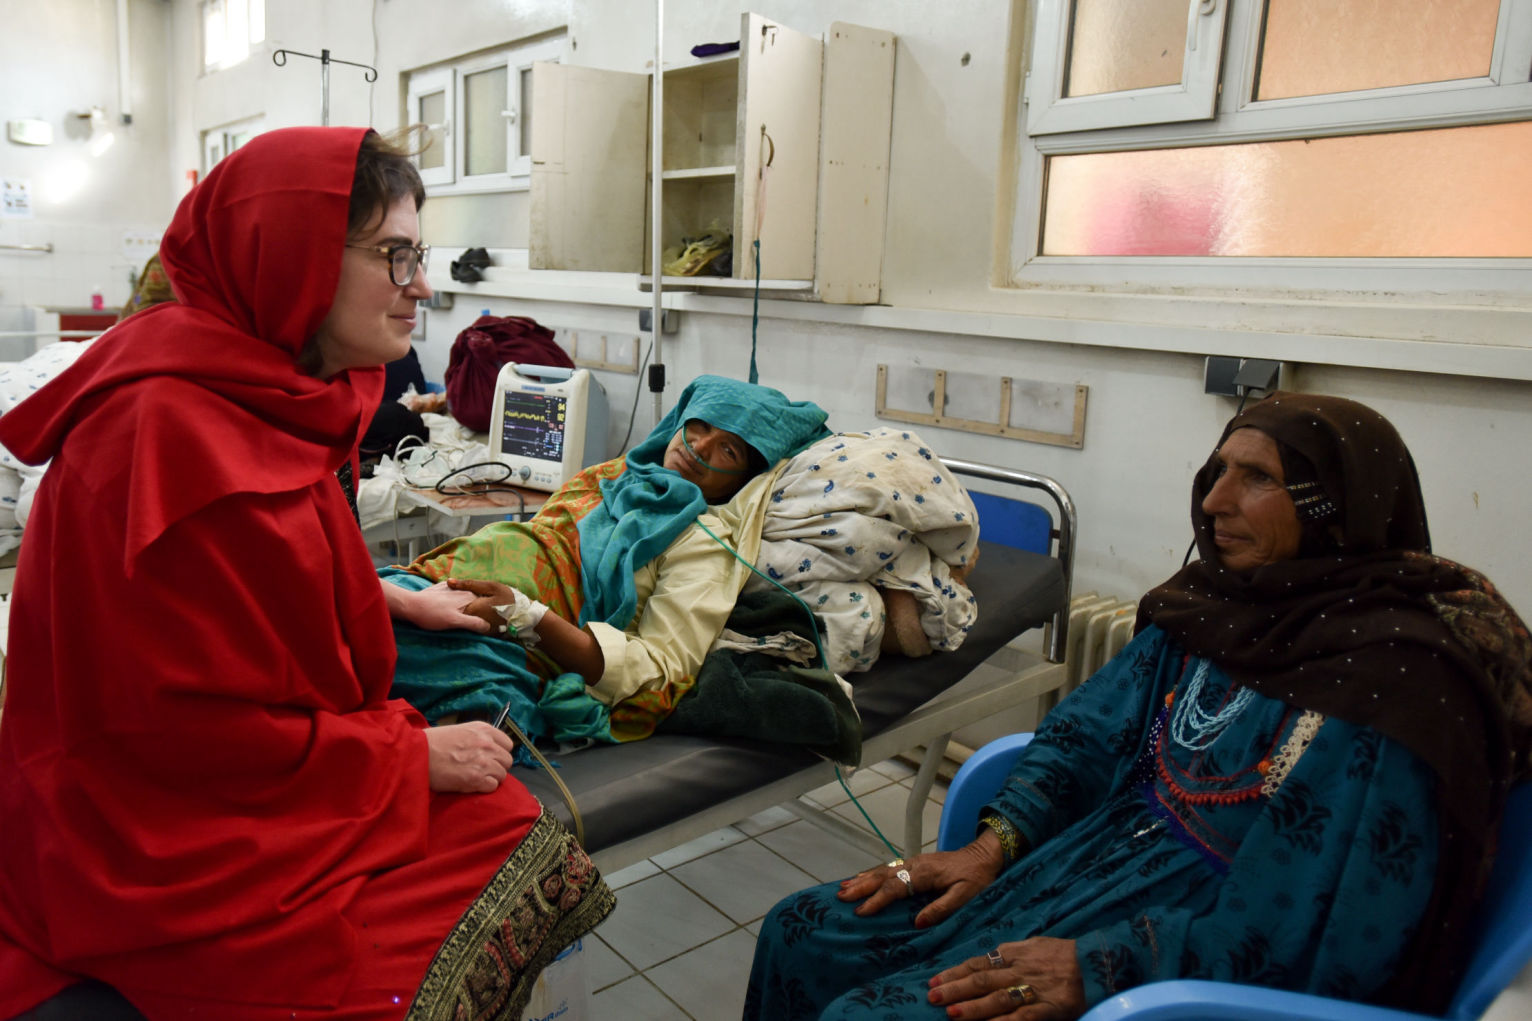 Dr Séverine Caluwaerts, MSF obstetrician-gynaecologist and Women’s Health Advisor, talking with a mother and her daughter, a patient in the maternity hospital in Khost, Afghanistan, who is slowly recovering from a post-partum haemorrhage after giving birth at home five days before. Photo by Najiba Noori. 